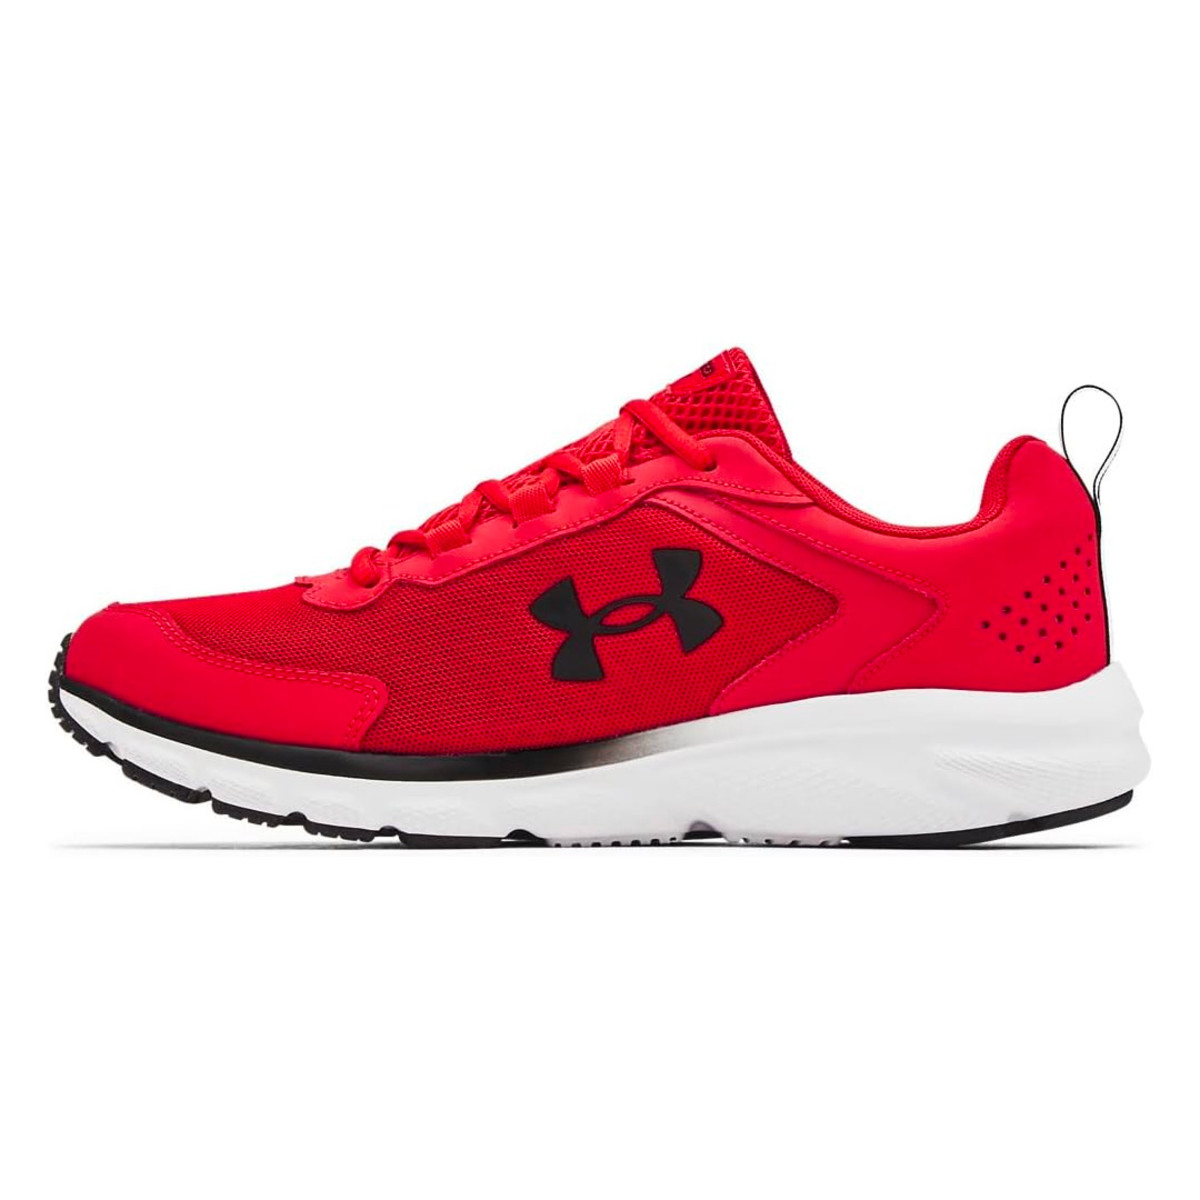 Save $20 on Under Armour's Charged Assert Running Shoe at